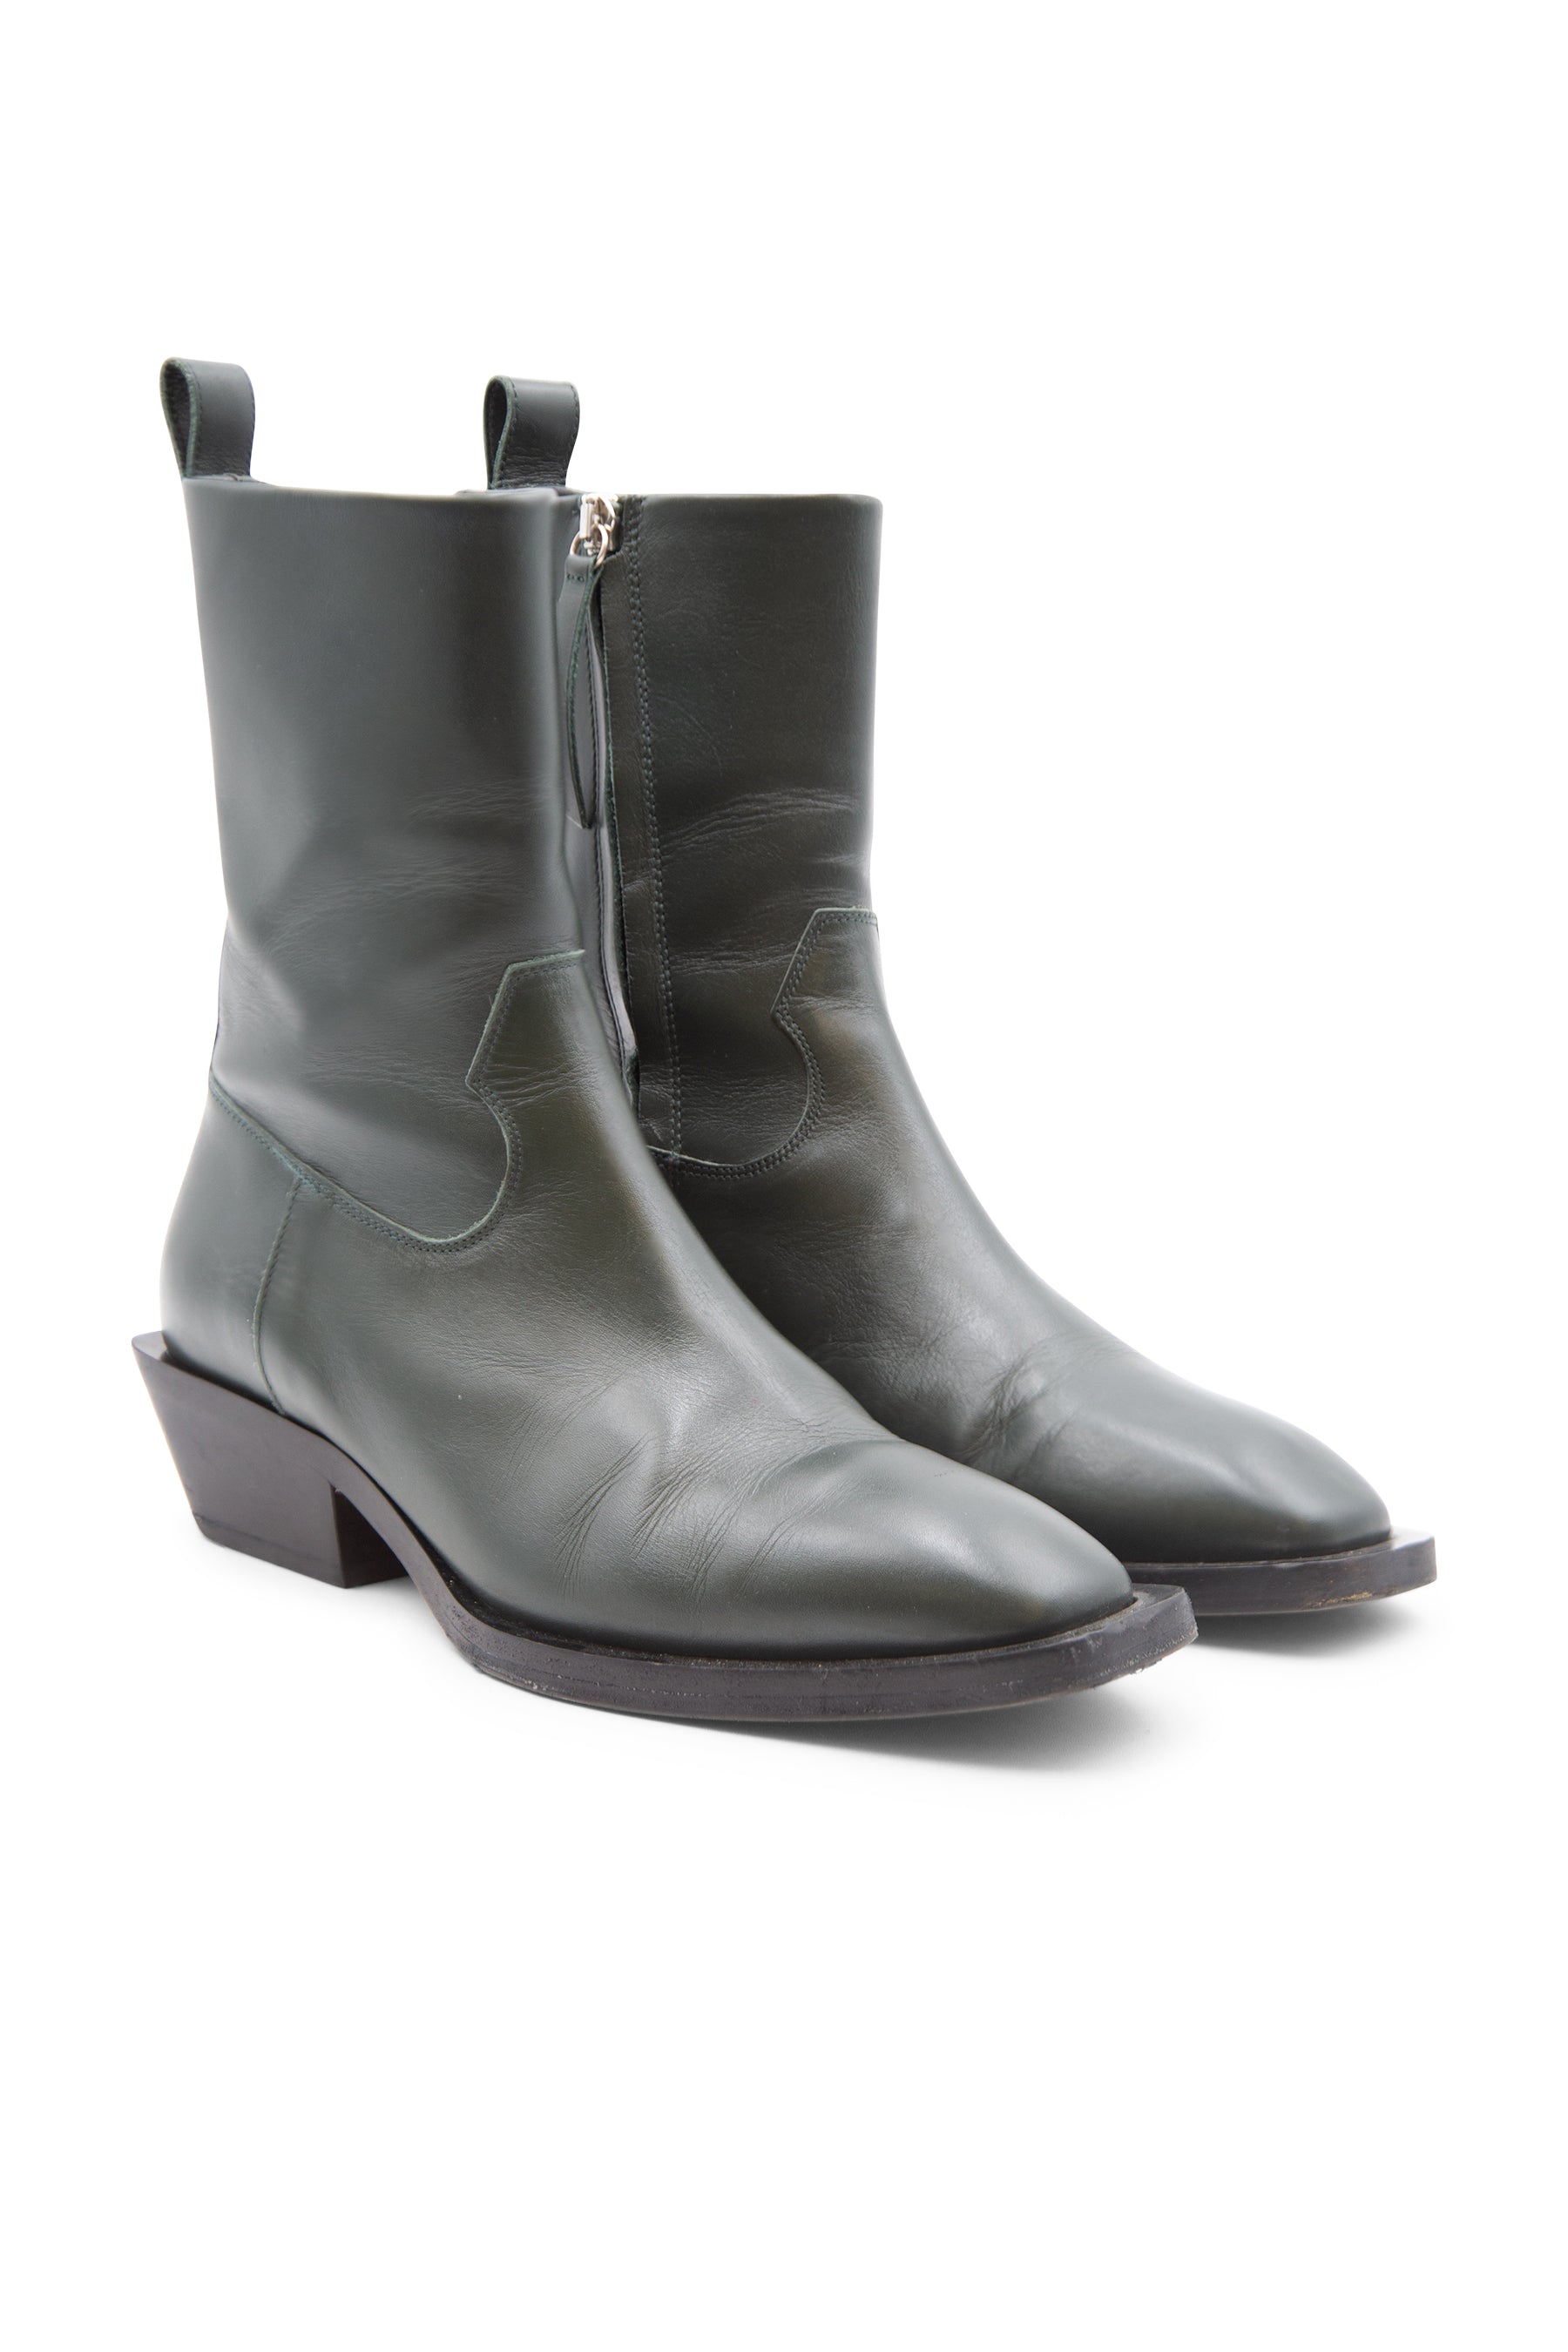 Aeyde Luis Leather Boots - Green for Women